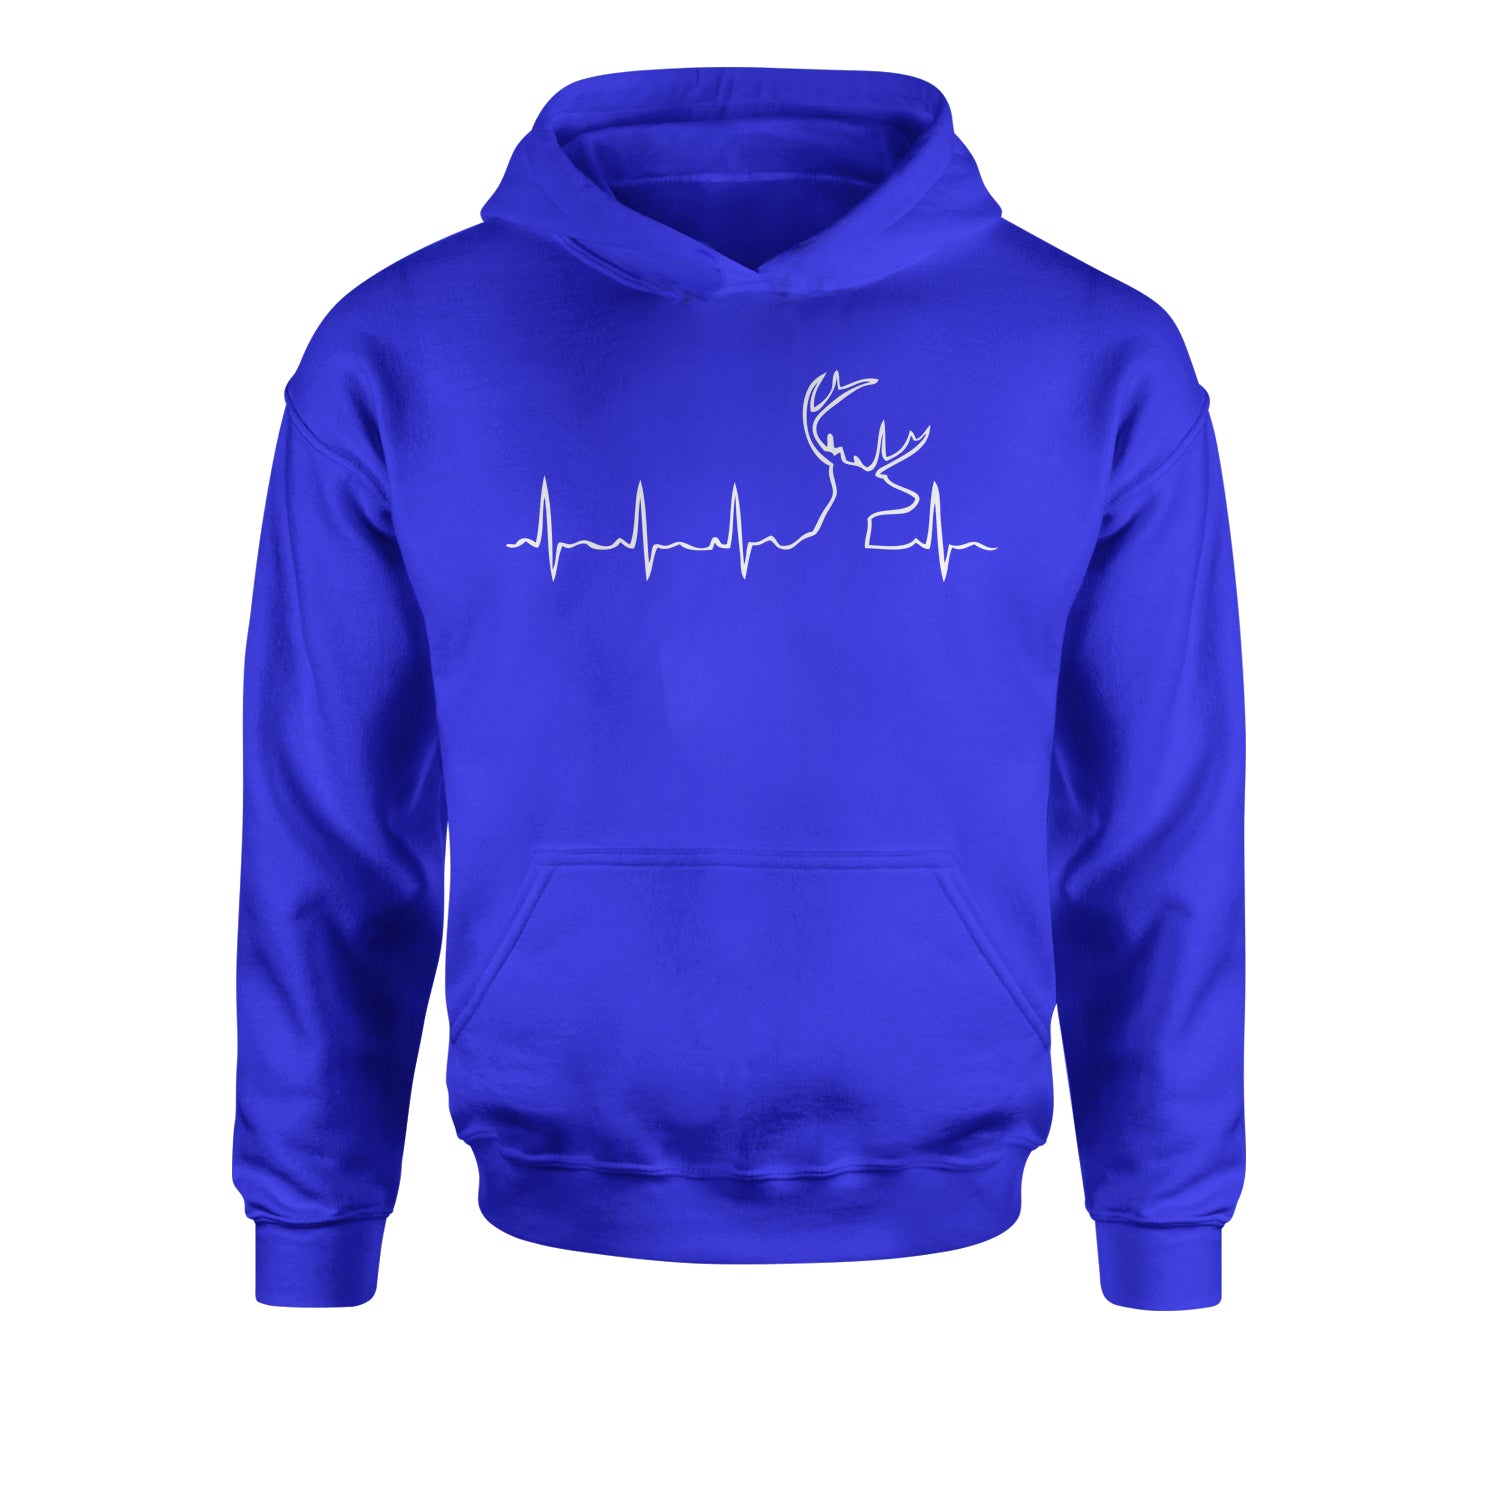 Hunting Heartbeat Dear Head Youth-Sized Hoodie #expressiontees by Expression Tees